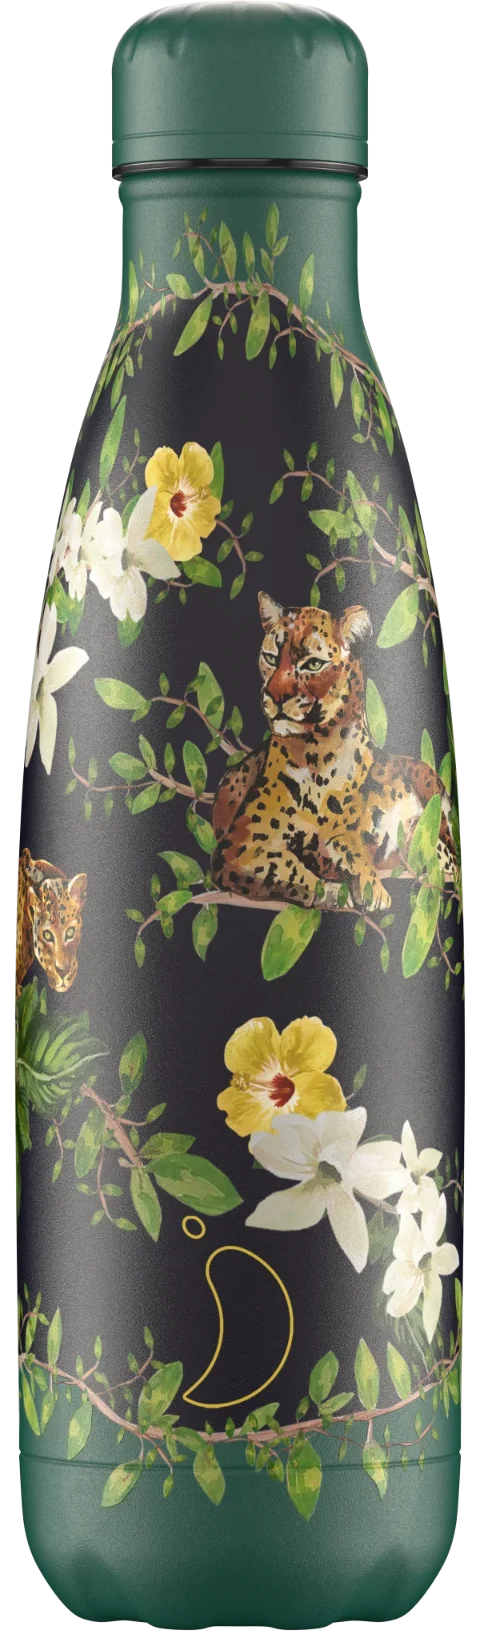 Chilly's Bottle 500Ml Tropical Flowering Leopard